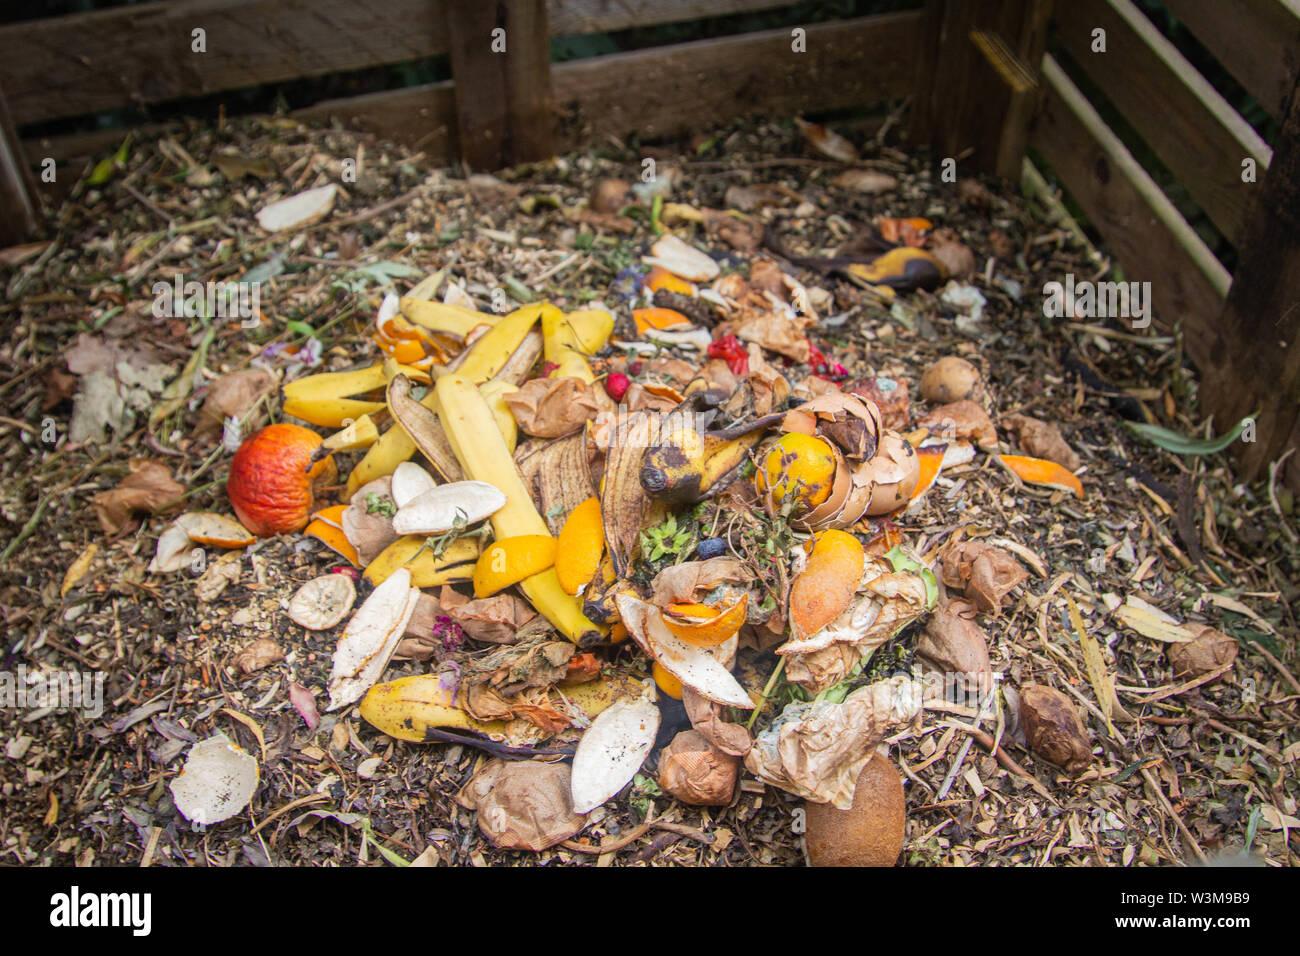 Compost bin - before and after - fresh food waste placed on top of rotted compost. Home composting. Stock Photo